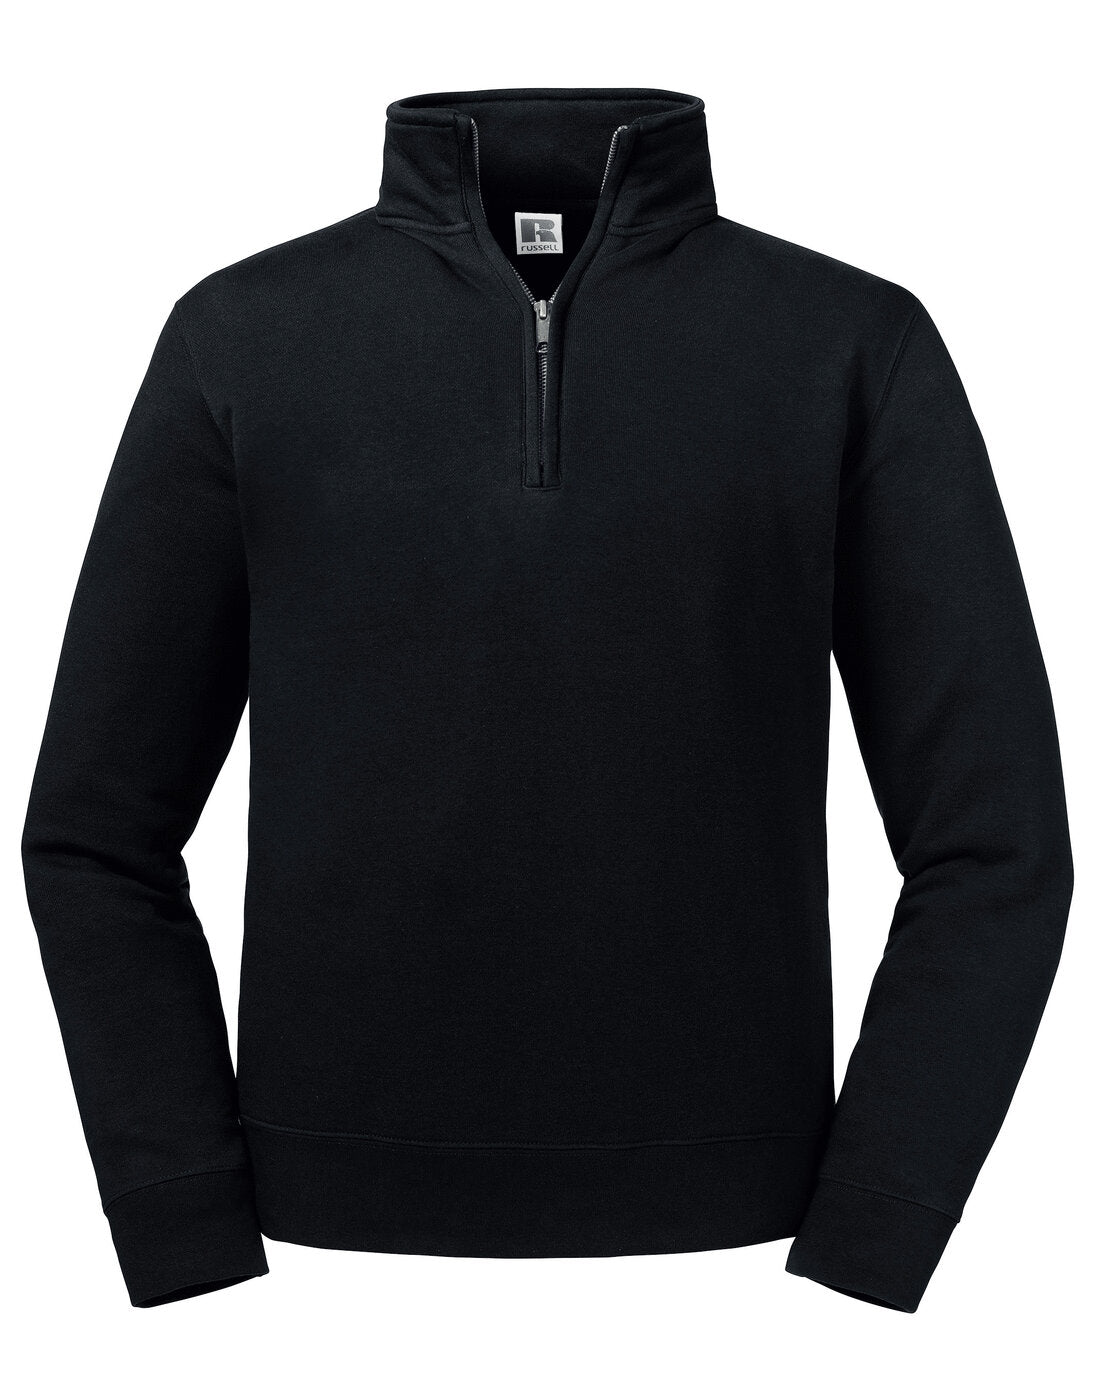 Russell Authentic 1/4 Zip Sweat Black